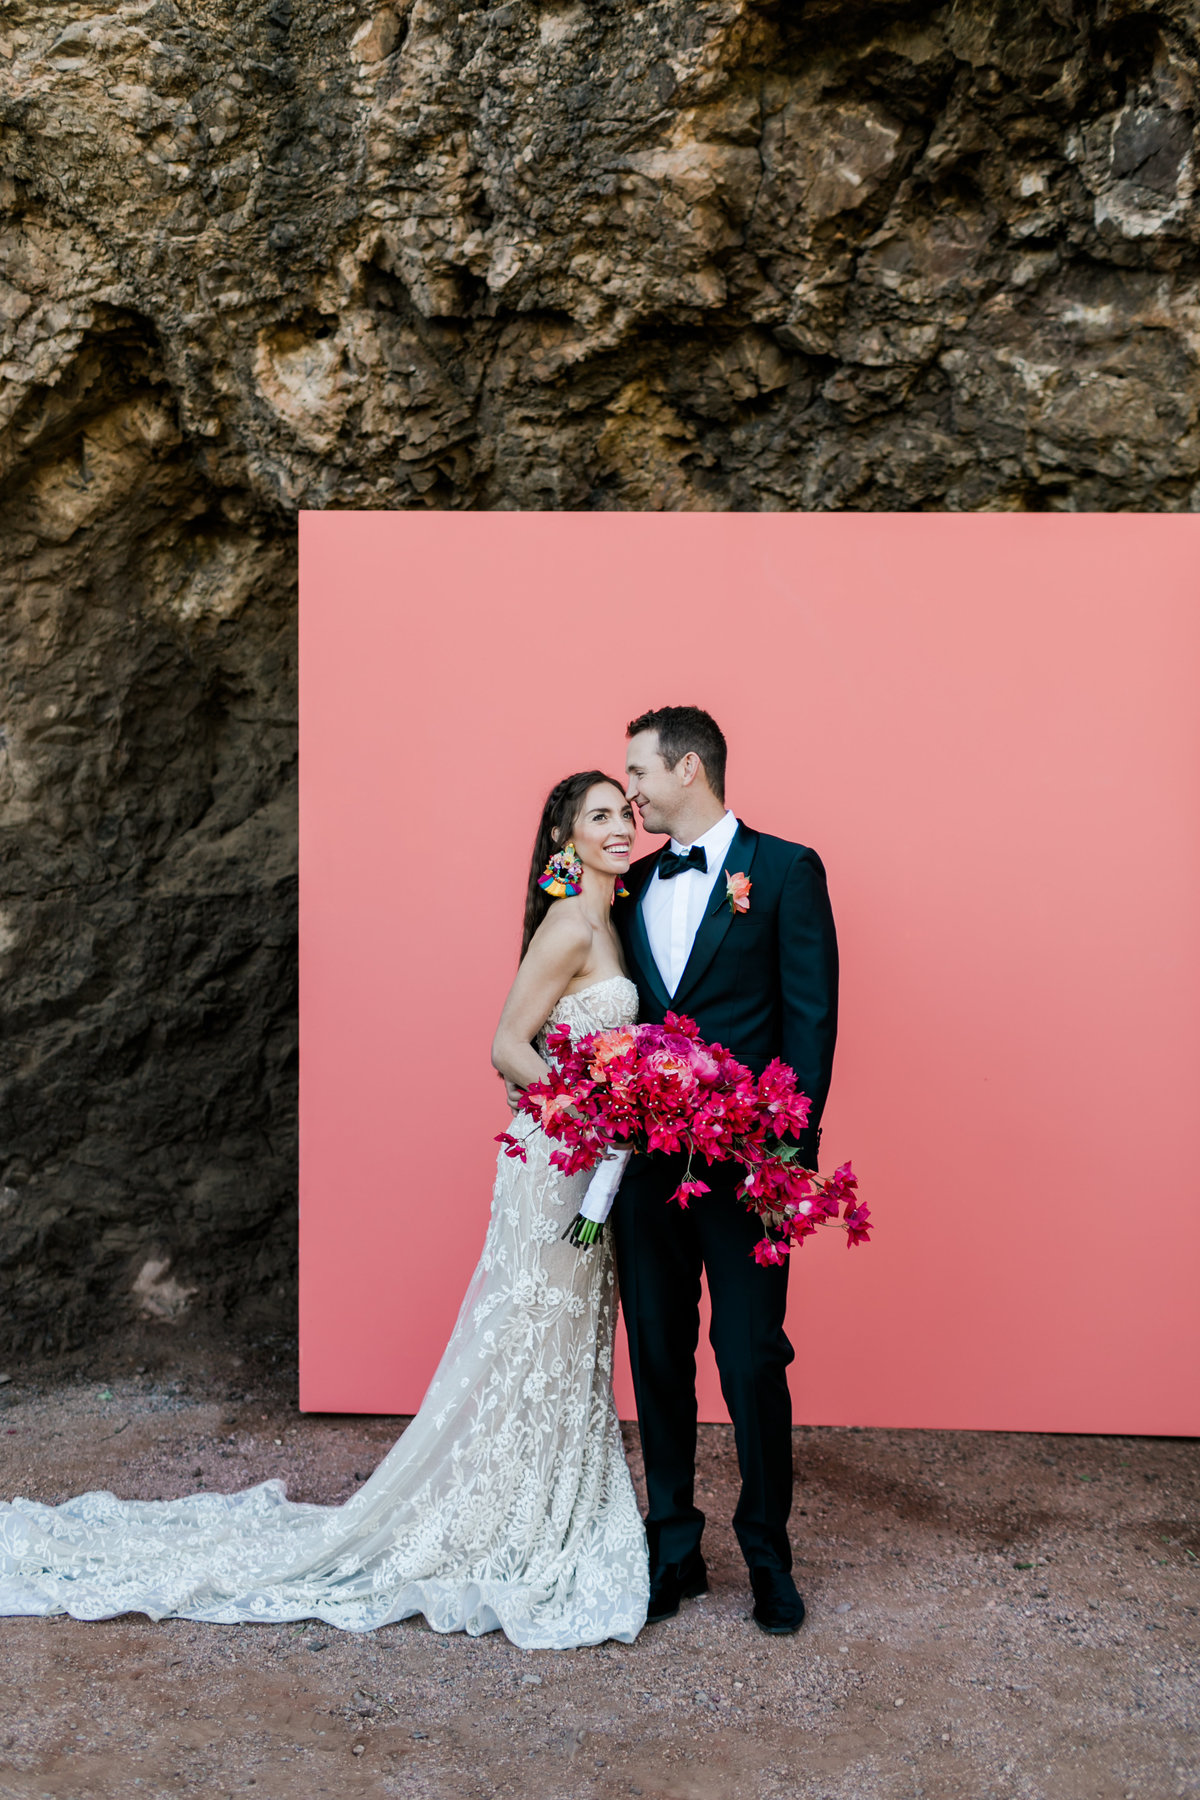 Colorful Desert Wedding Inspiration_Valorie Darling Photography-0726